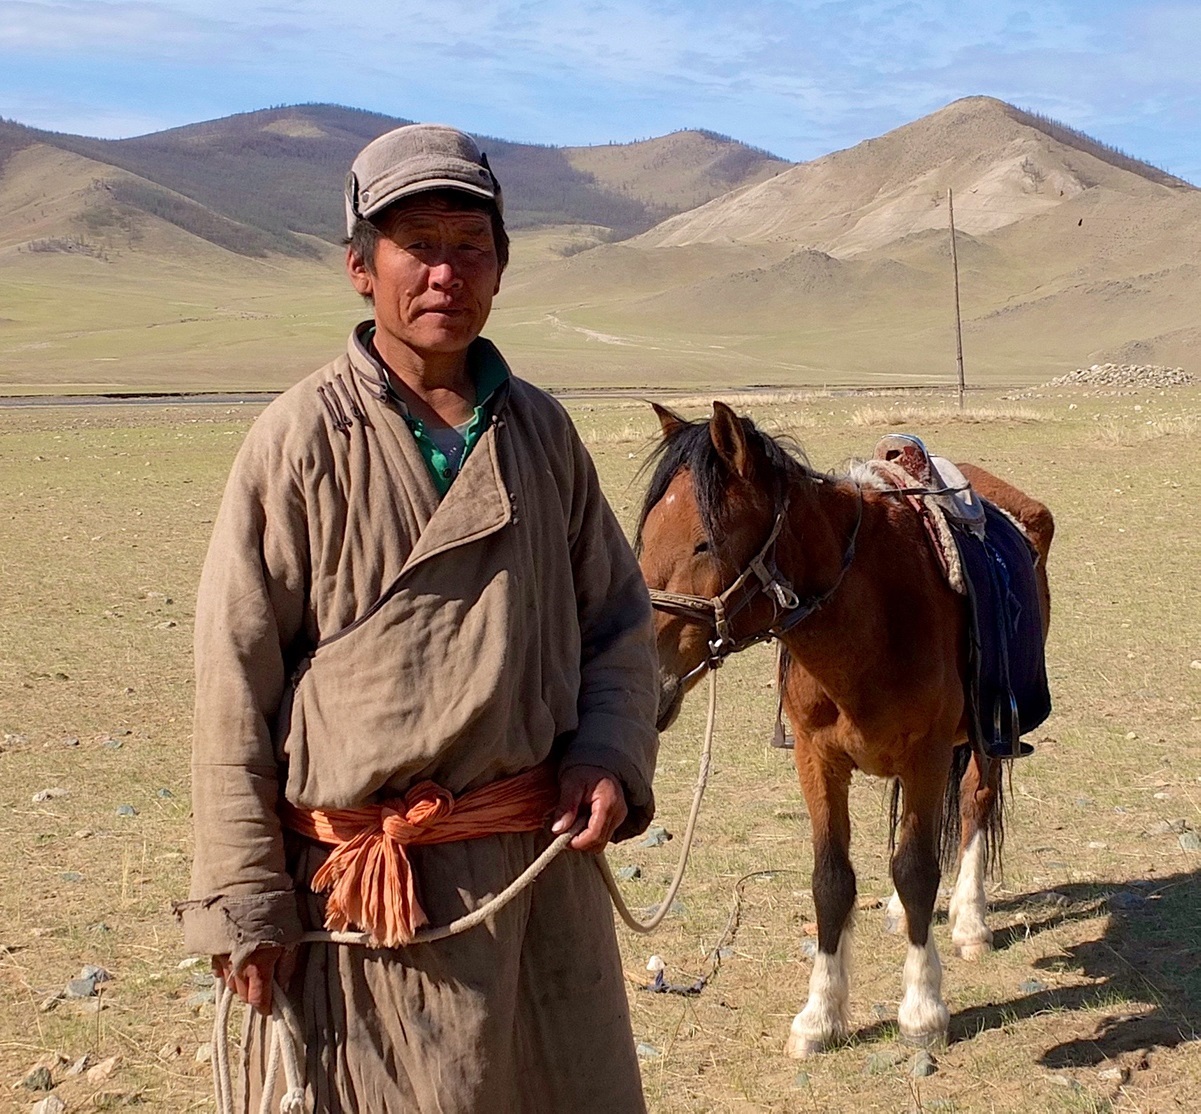 A mongolian man stands with a donkey on a lead for the camera